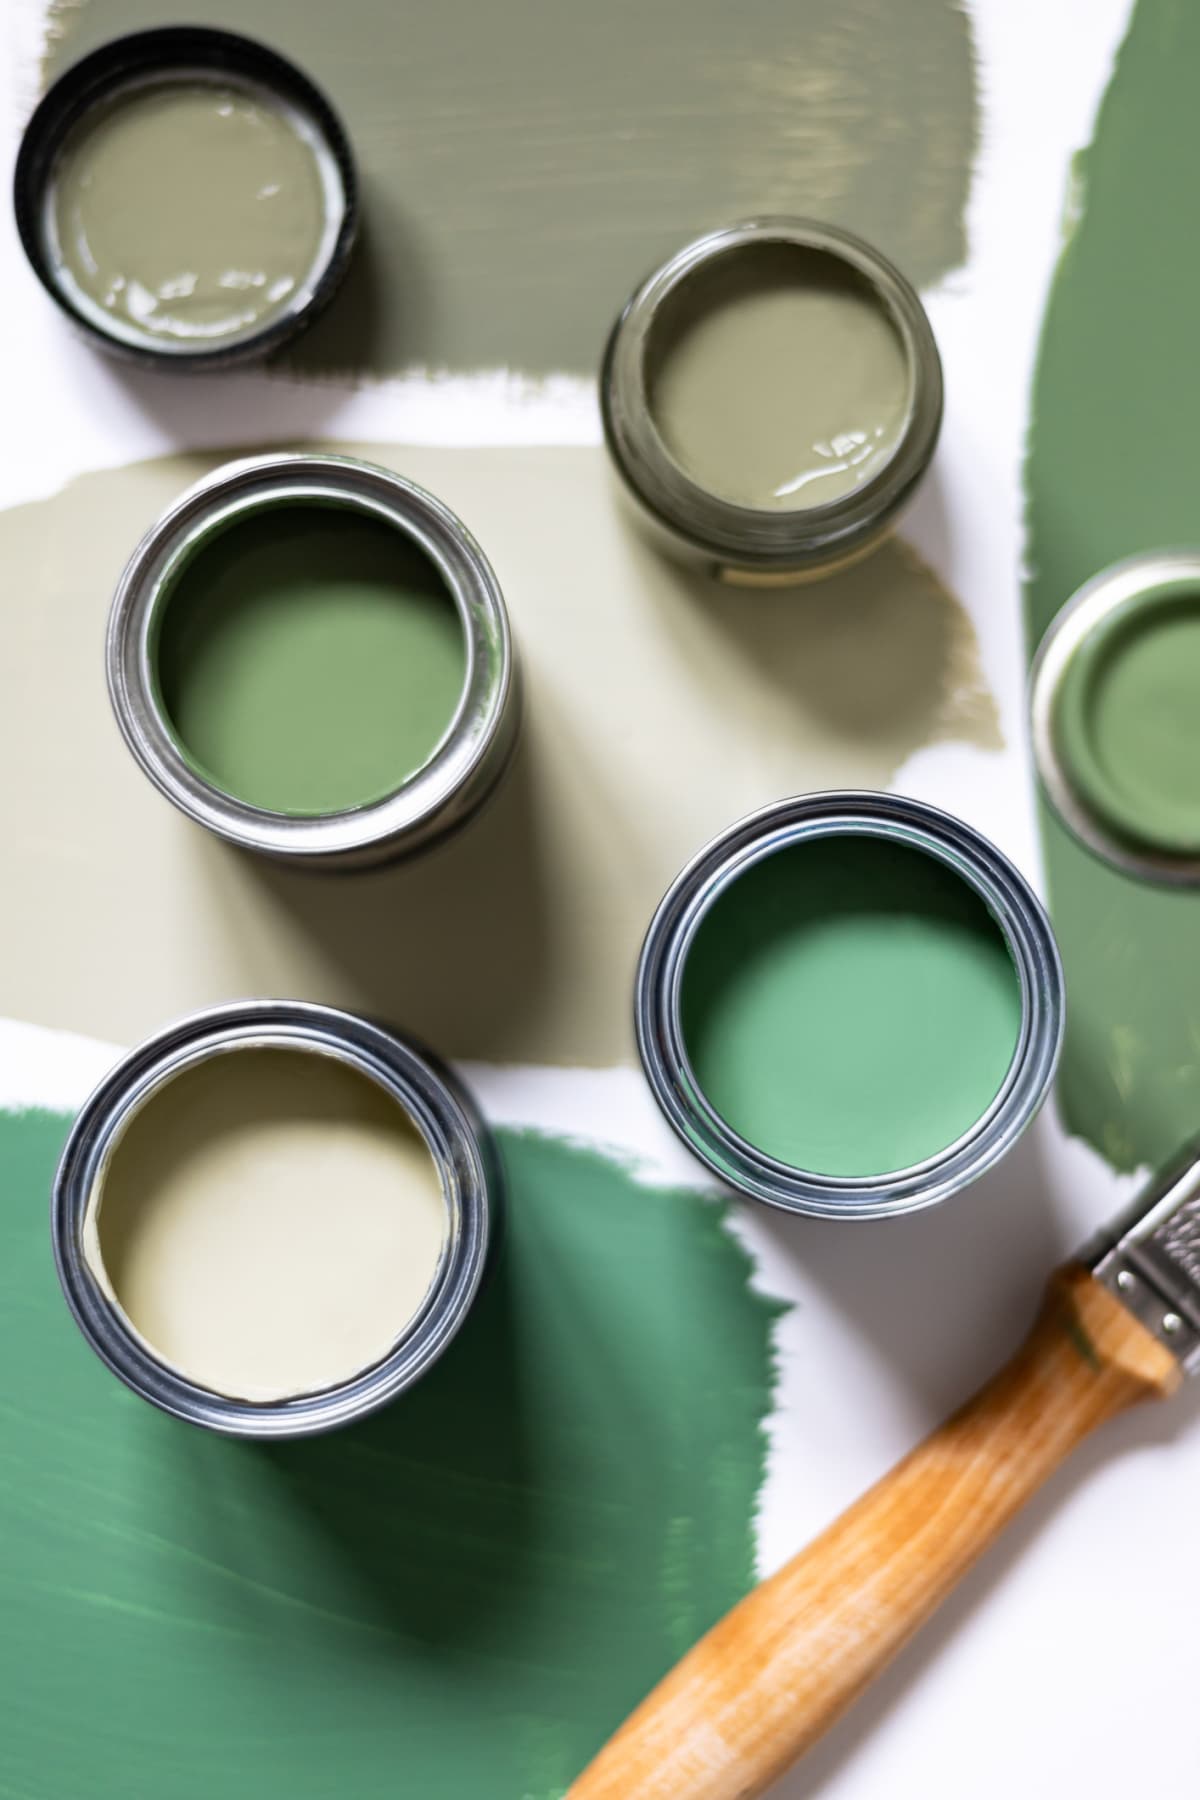 Tiny sample paint cans during house renovation, process of choosing paint for the walls, different green colors, color samples on background.